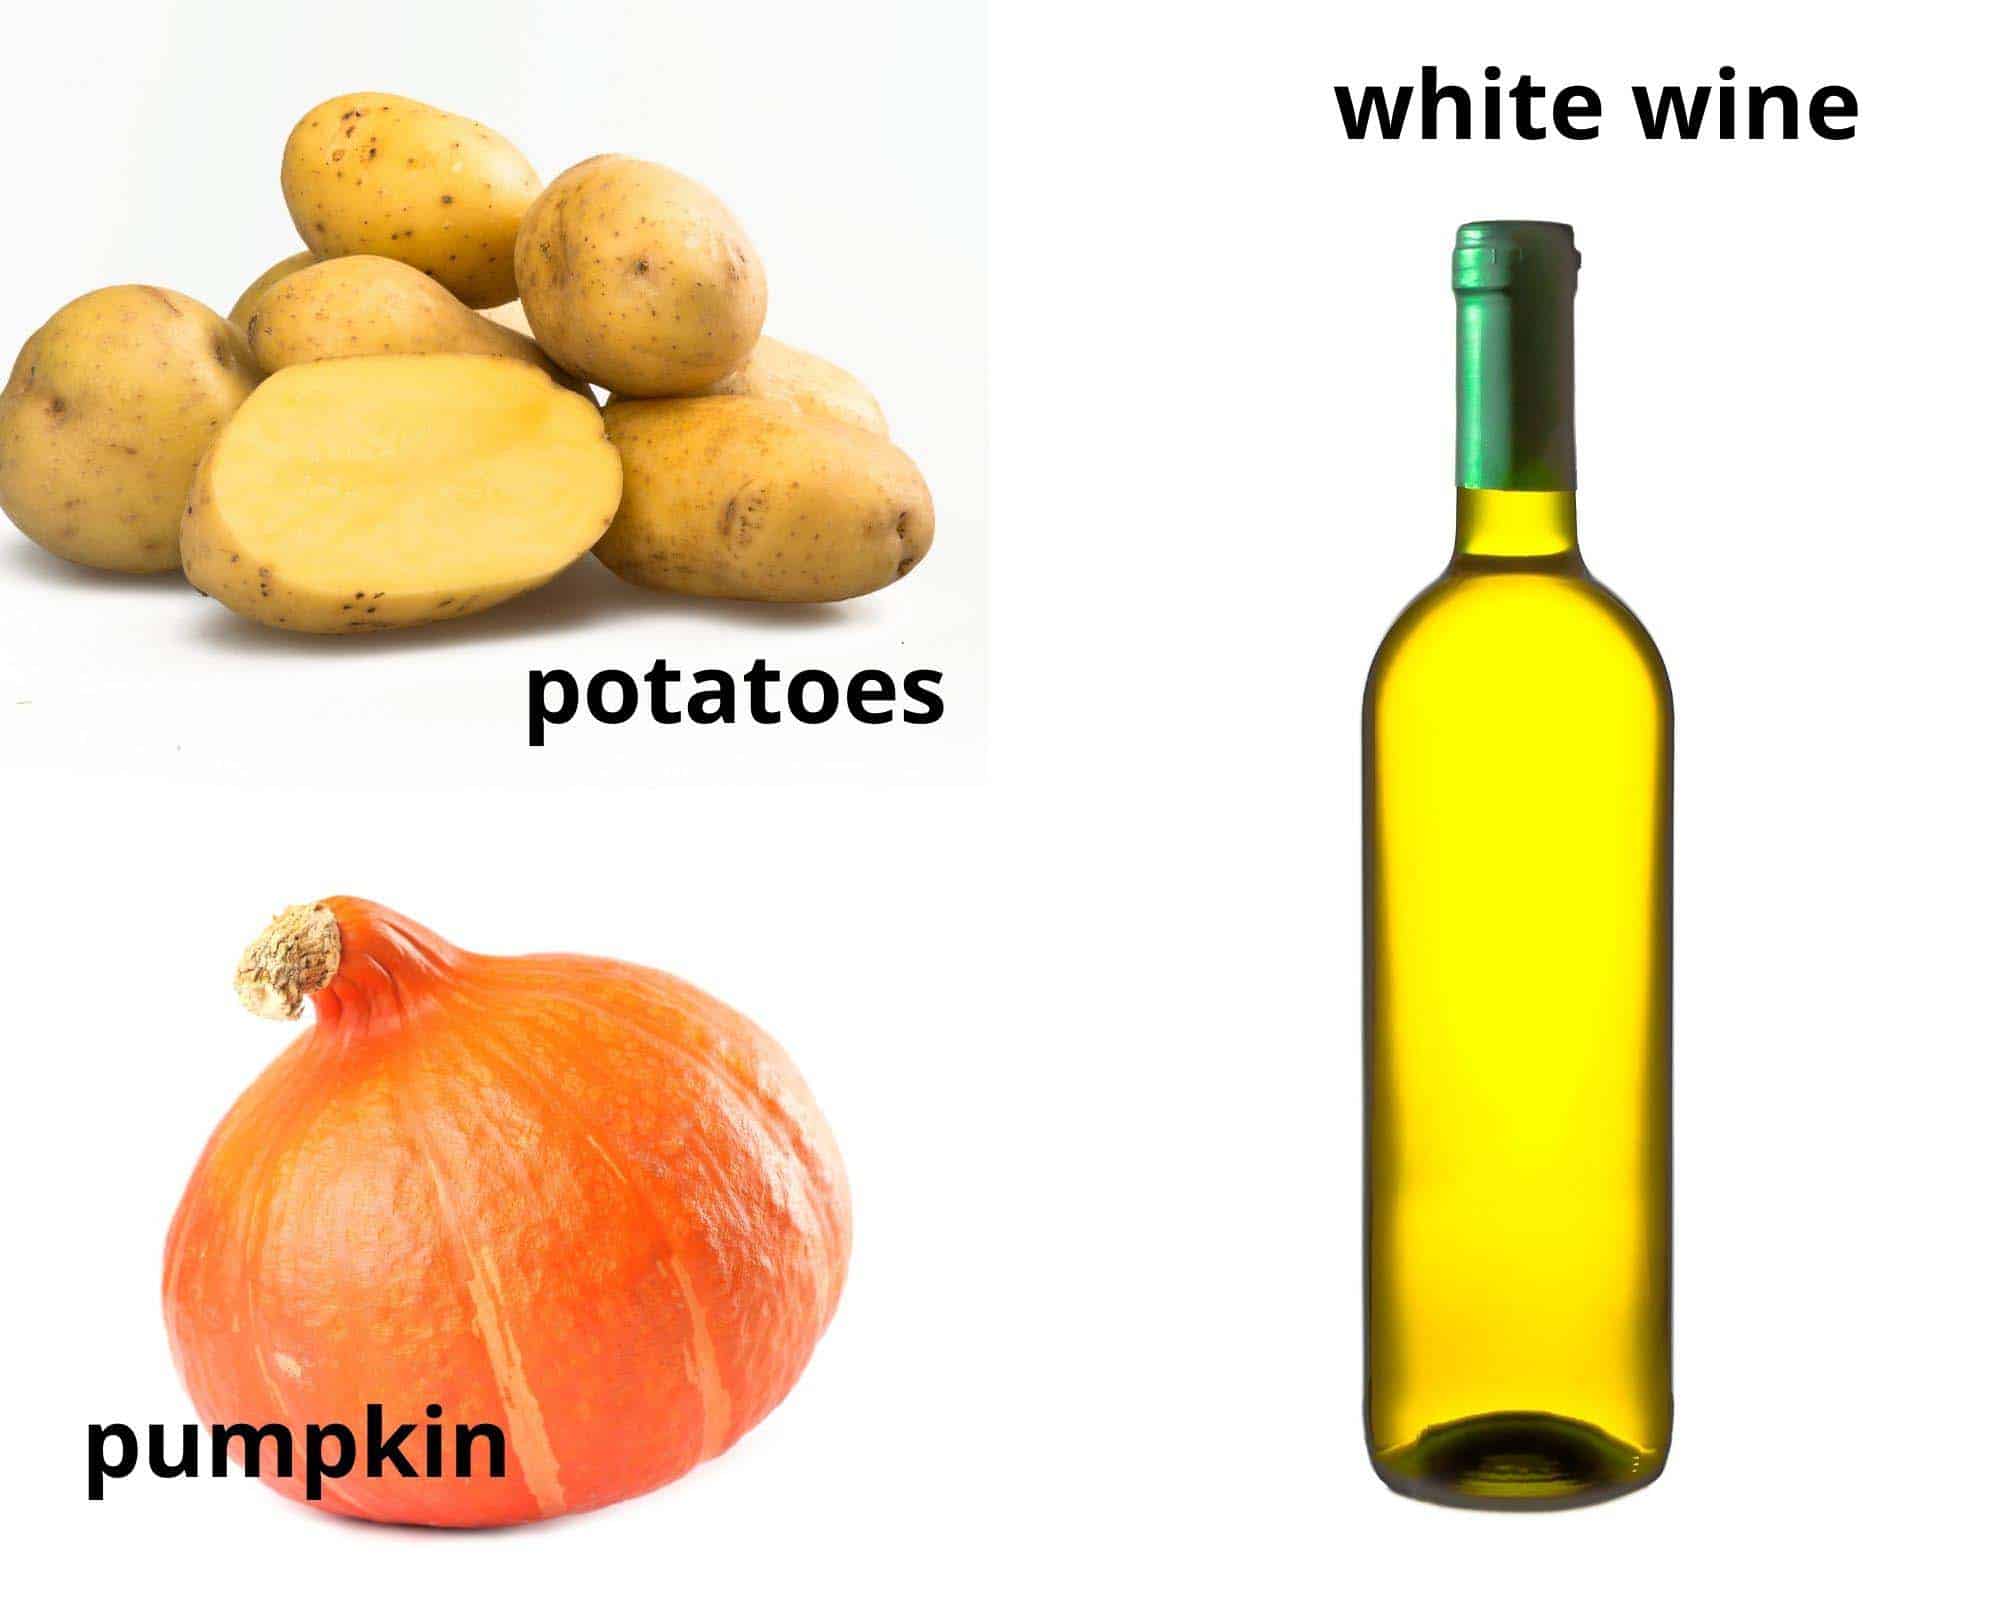 collage of three pictures of potatoes, pumpkin and a bottle of white wine.